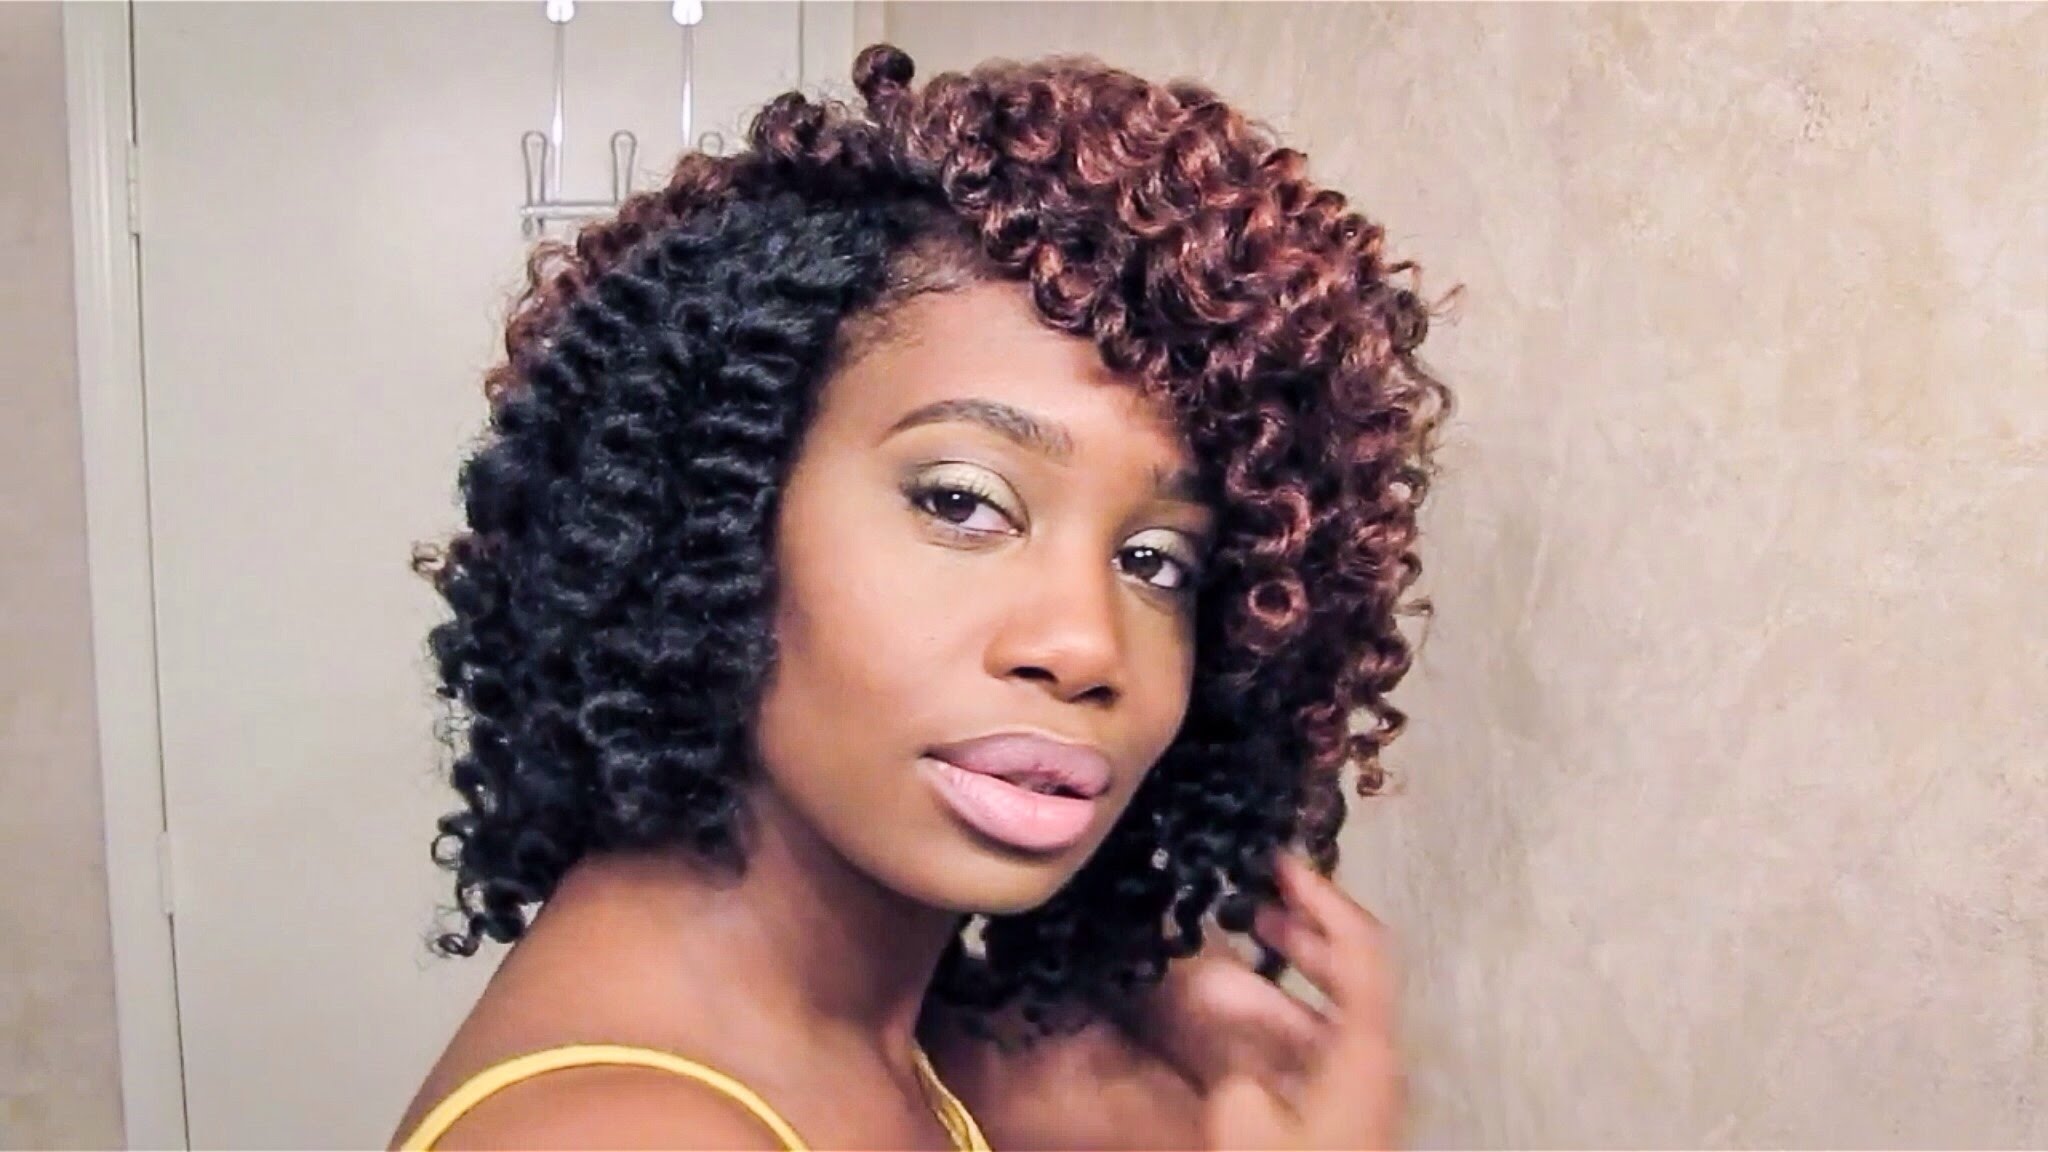 How To: Crochet Braids Video Tutorial With Marley Hair